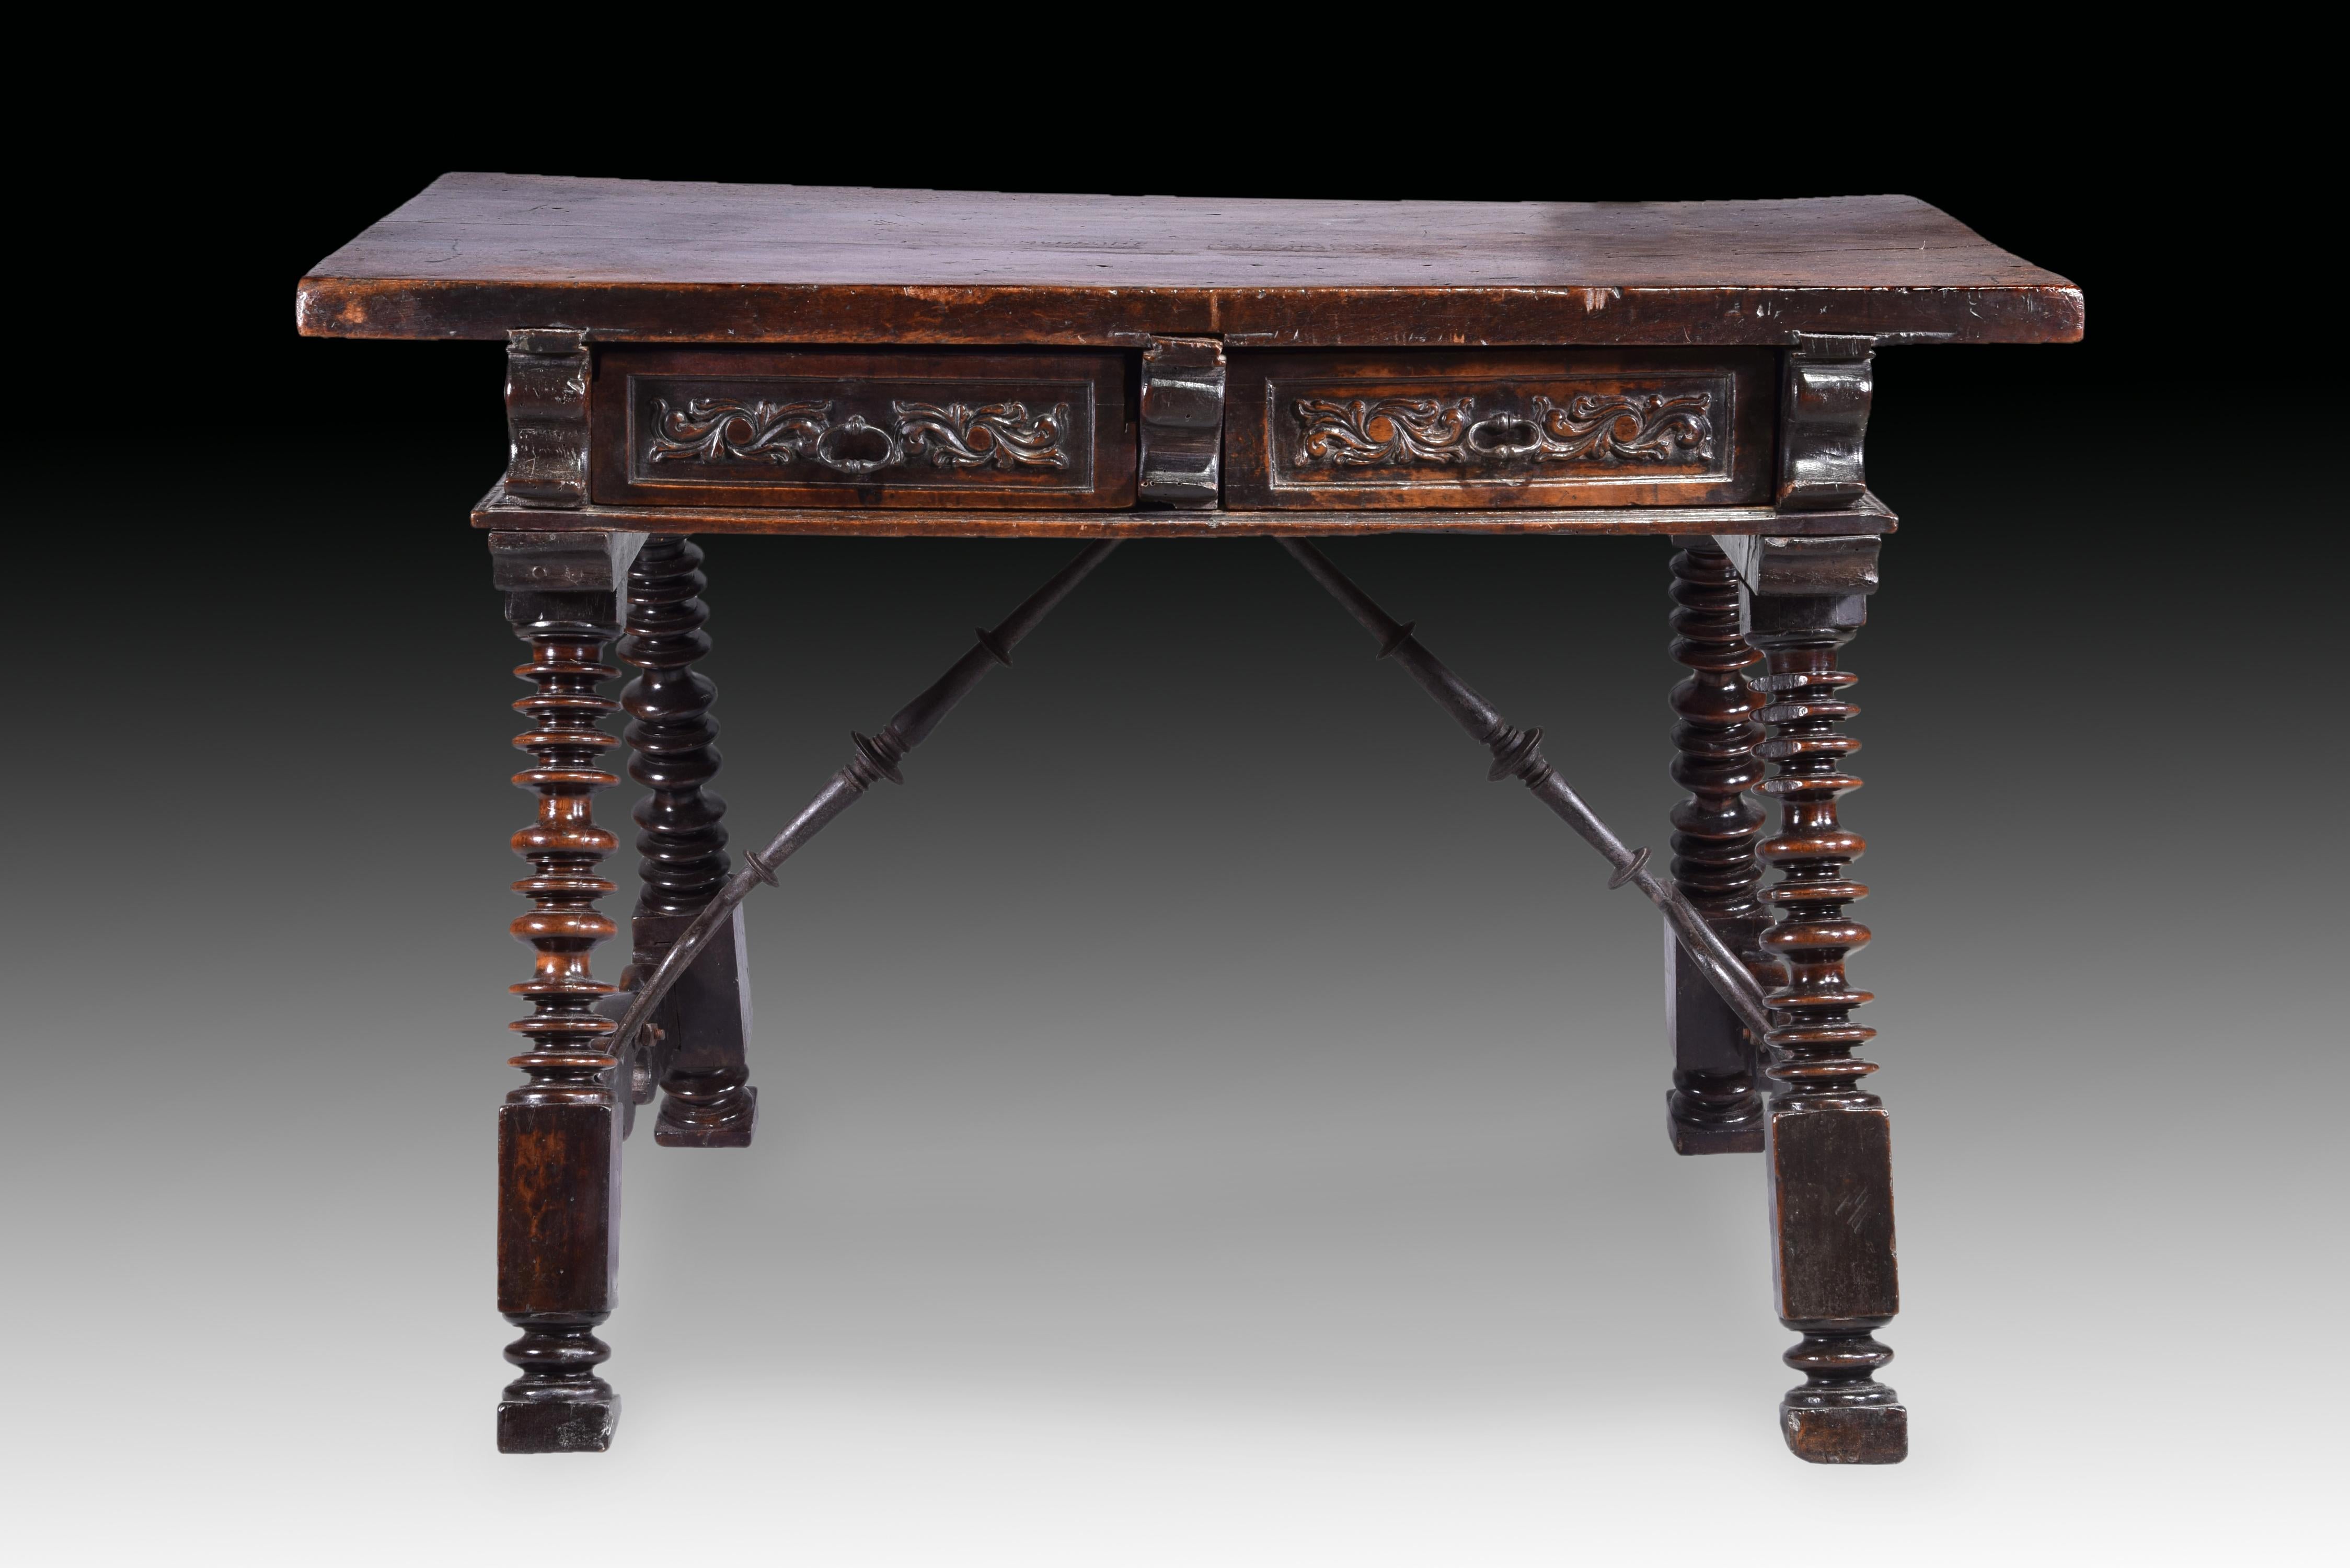 table with hairpin clips. Walnut wood, wrought iron. Spain, 17th century.
 table made of carved and turned walnut wood with four A-legs, two wrought iron hairpin clips and drawers on both fronts (a total of four) decorated with plant-themed